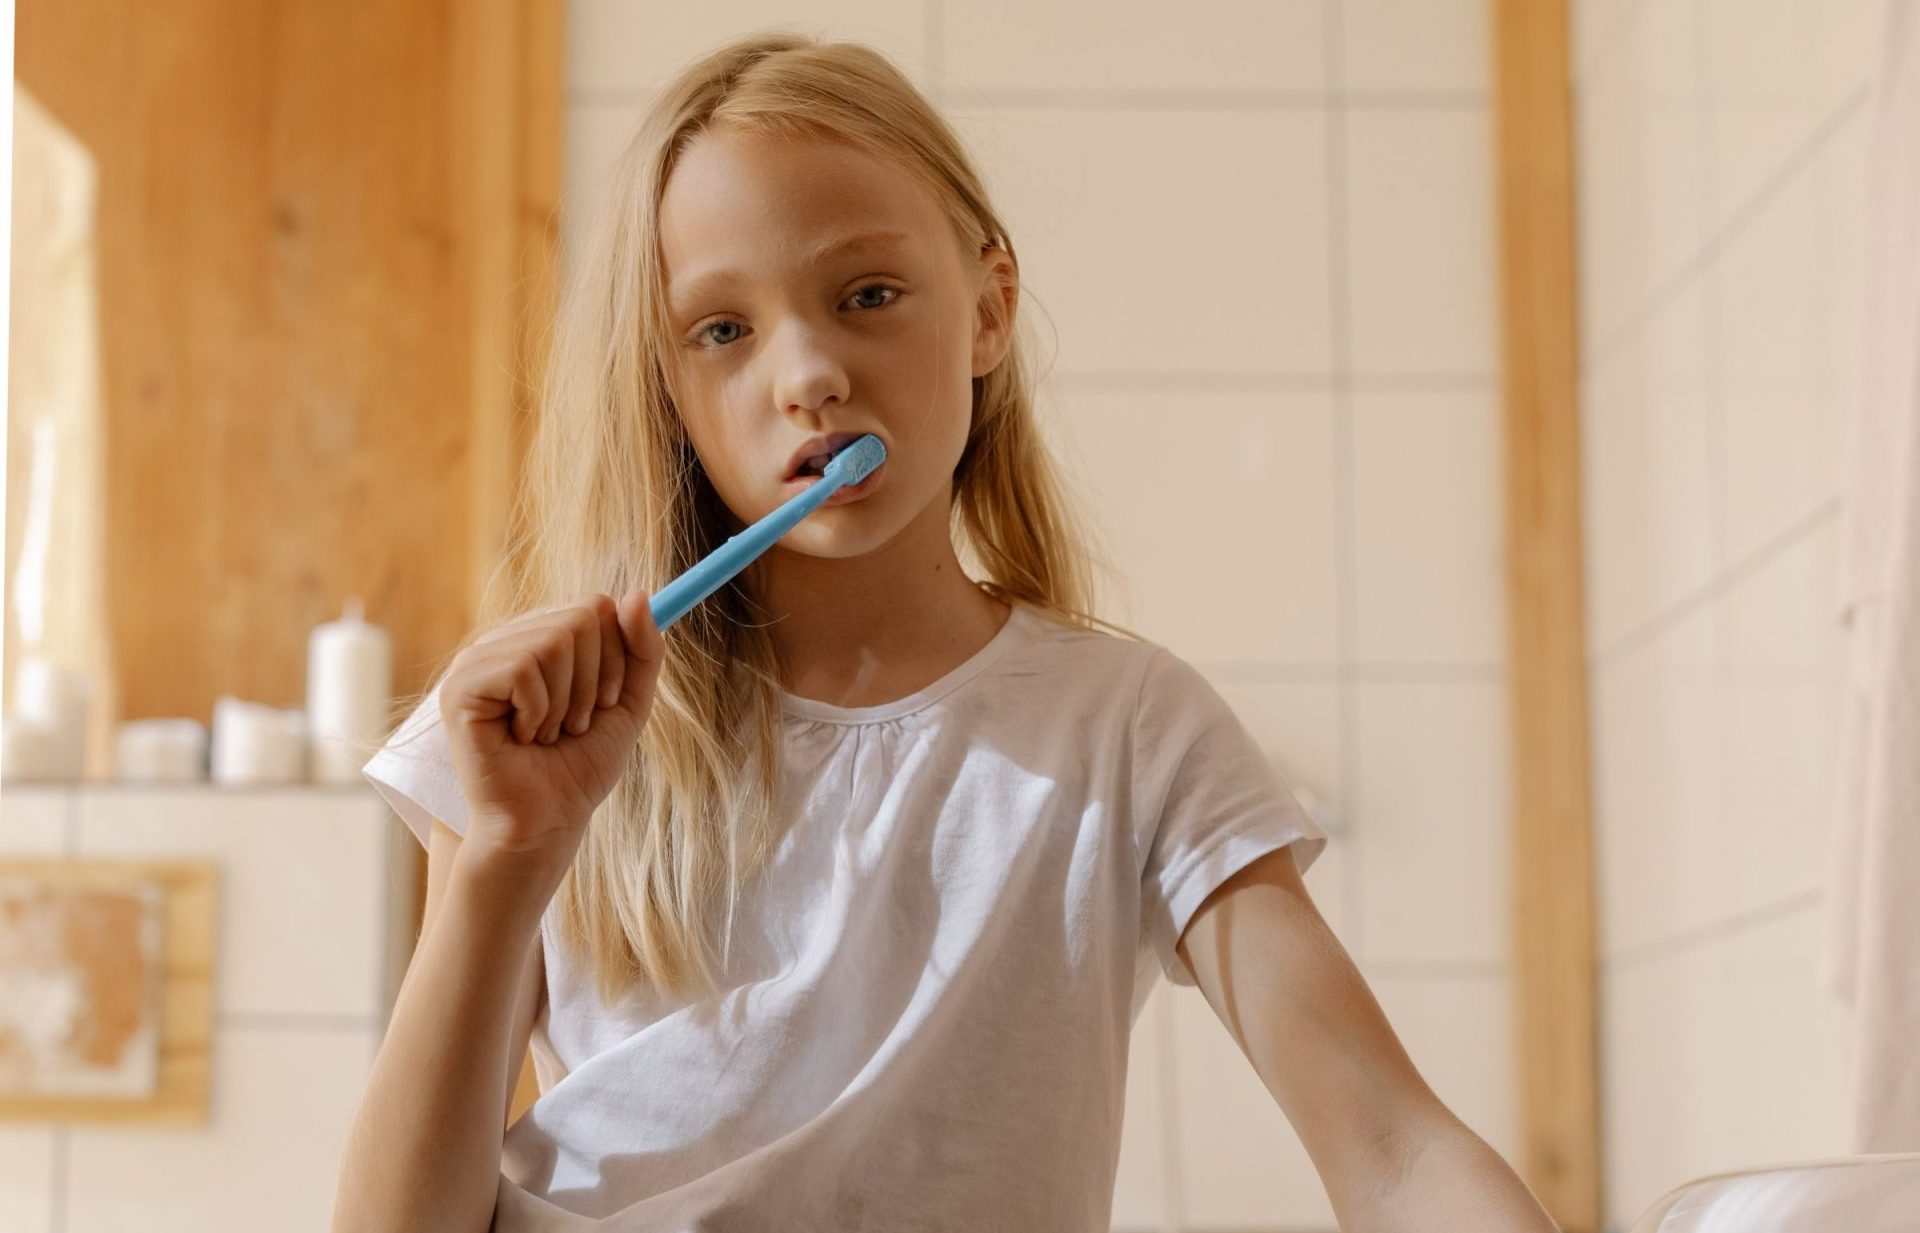 Little girl brushing her teeth with a blue toothbrush